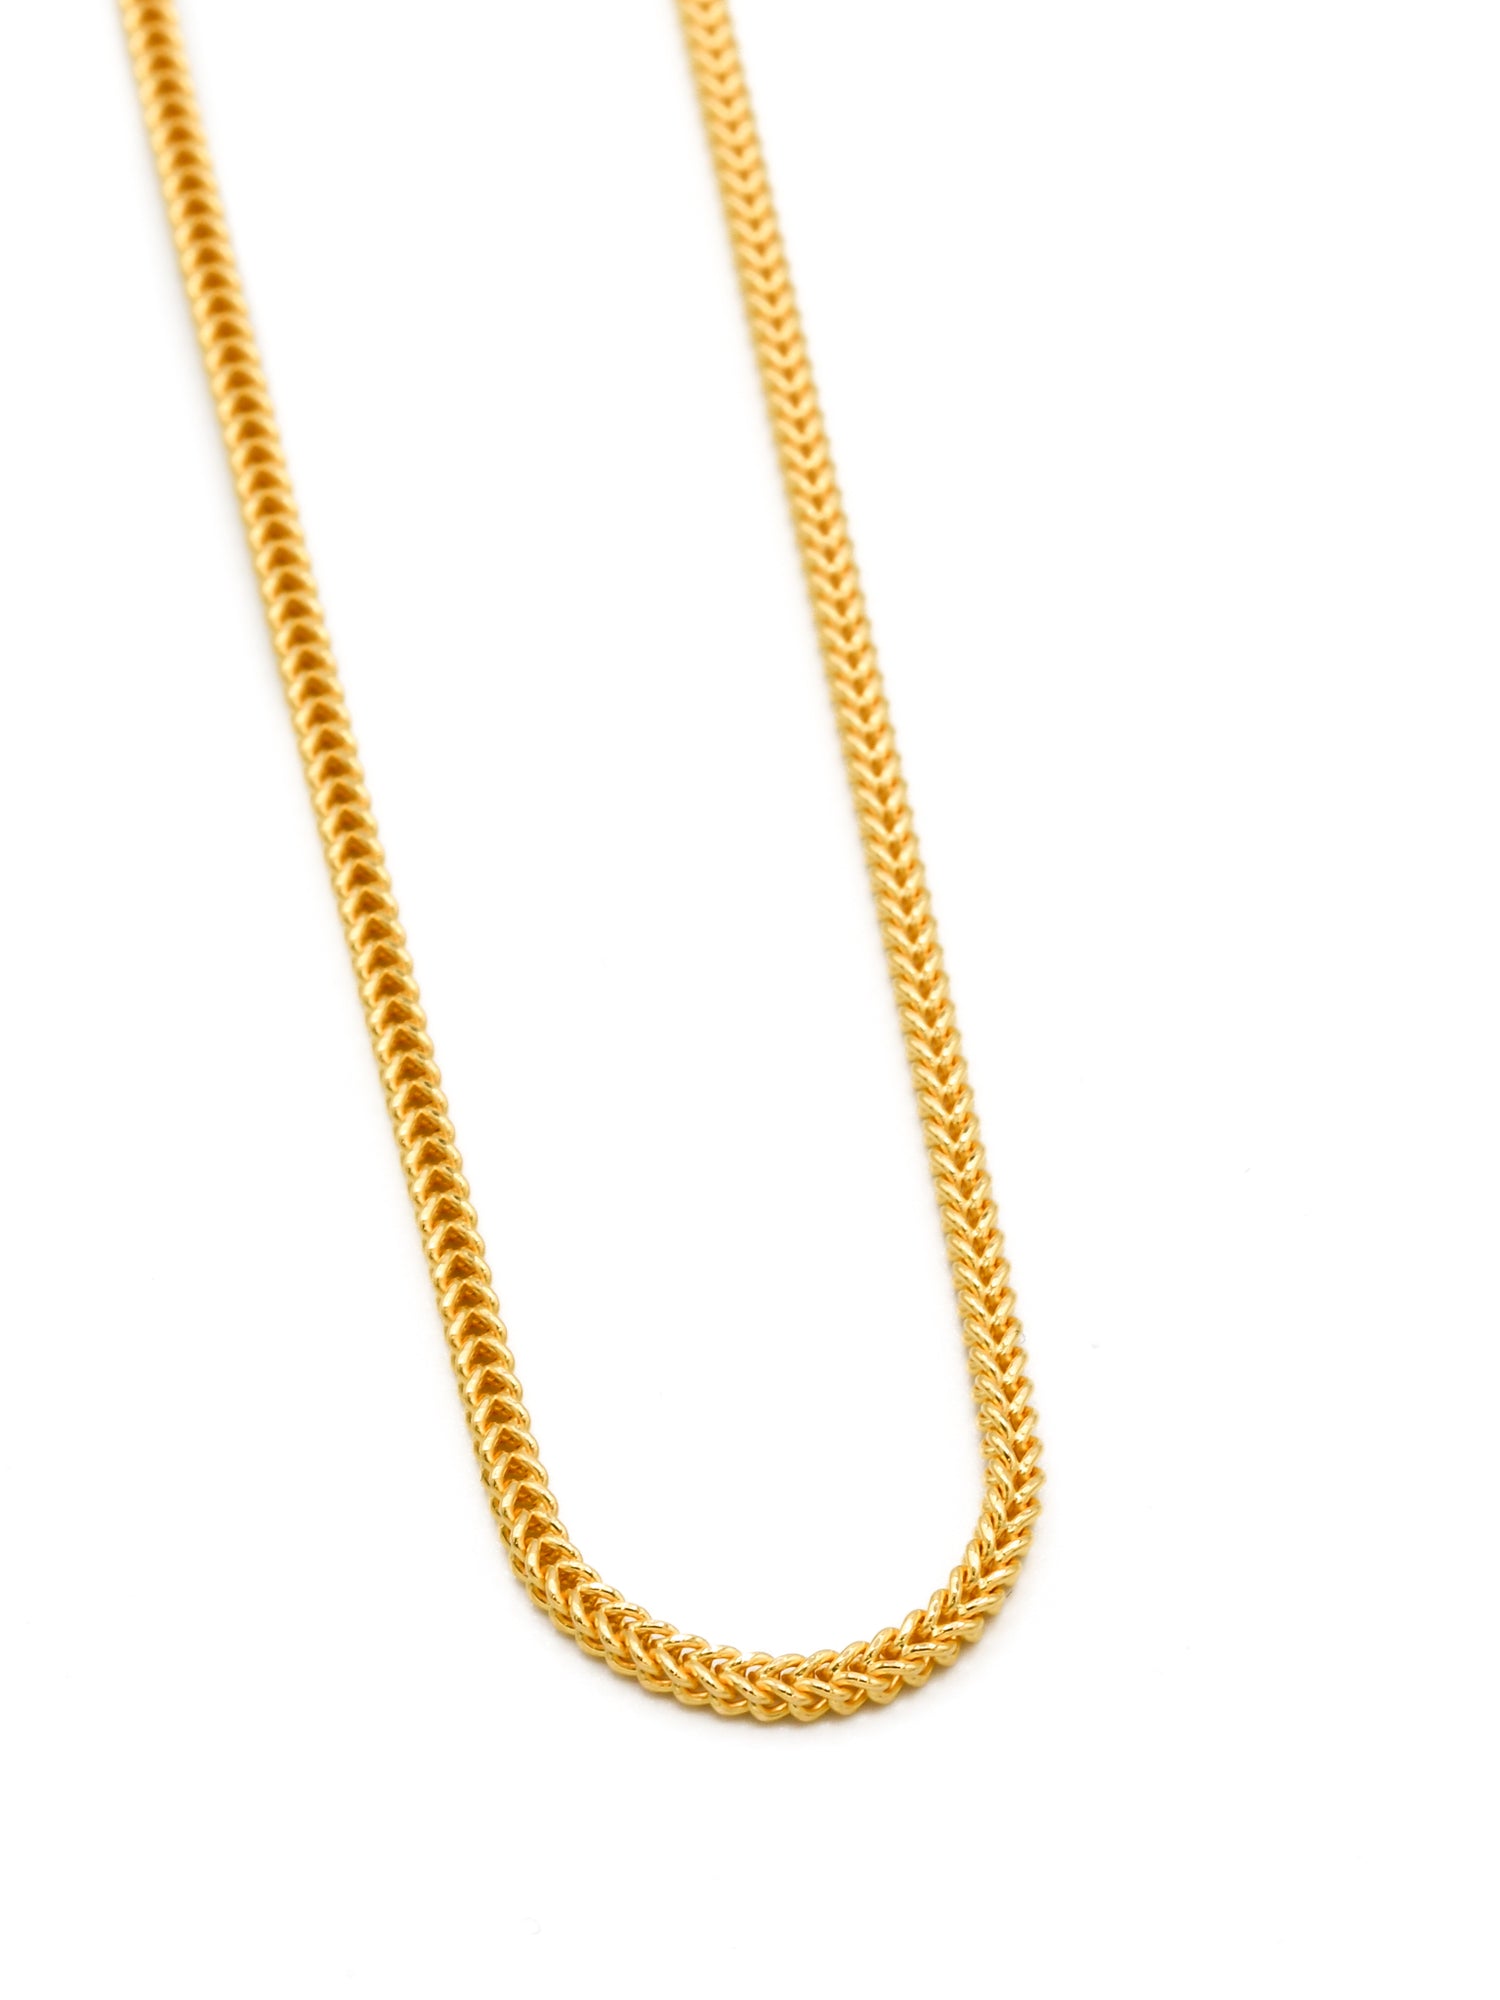 22ct Gold Hollow Fox Tail Chain - 45cm - Roop Darshan